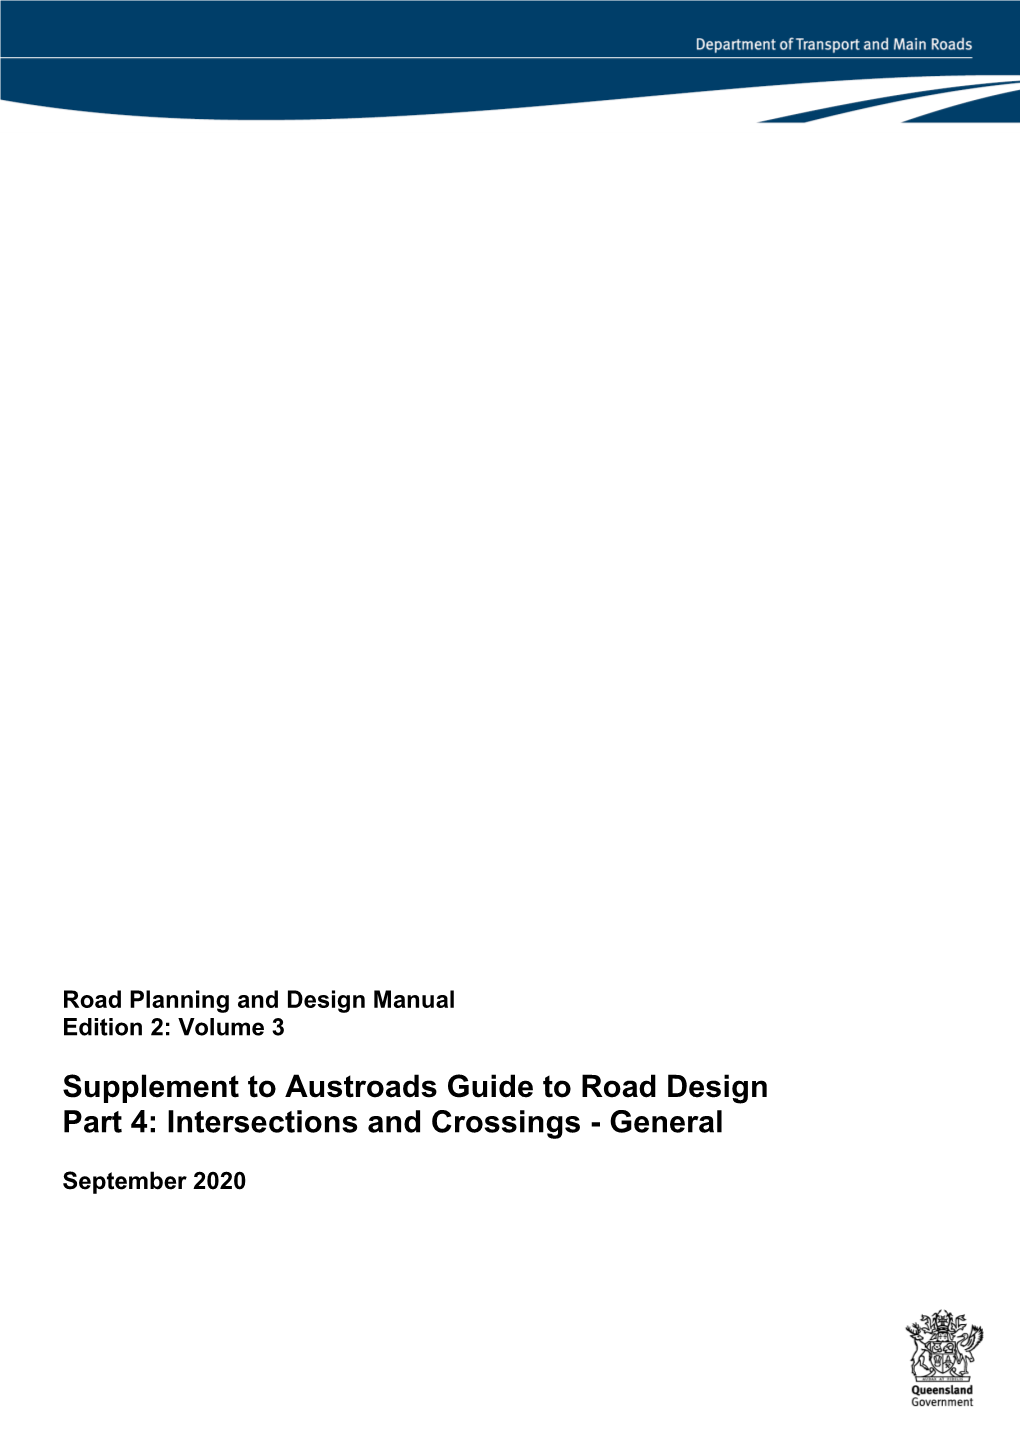 Supplement to Austroads Guide to Road Design Part 4: Intersections and Crossings - General